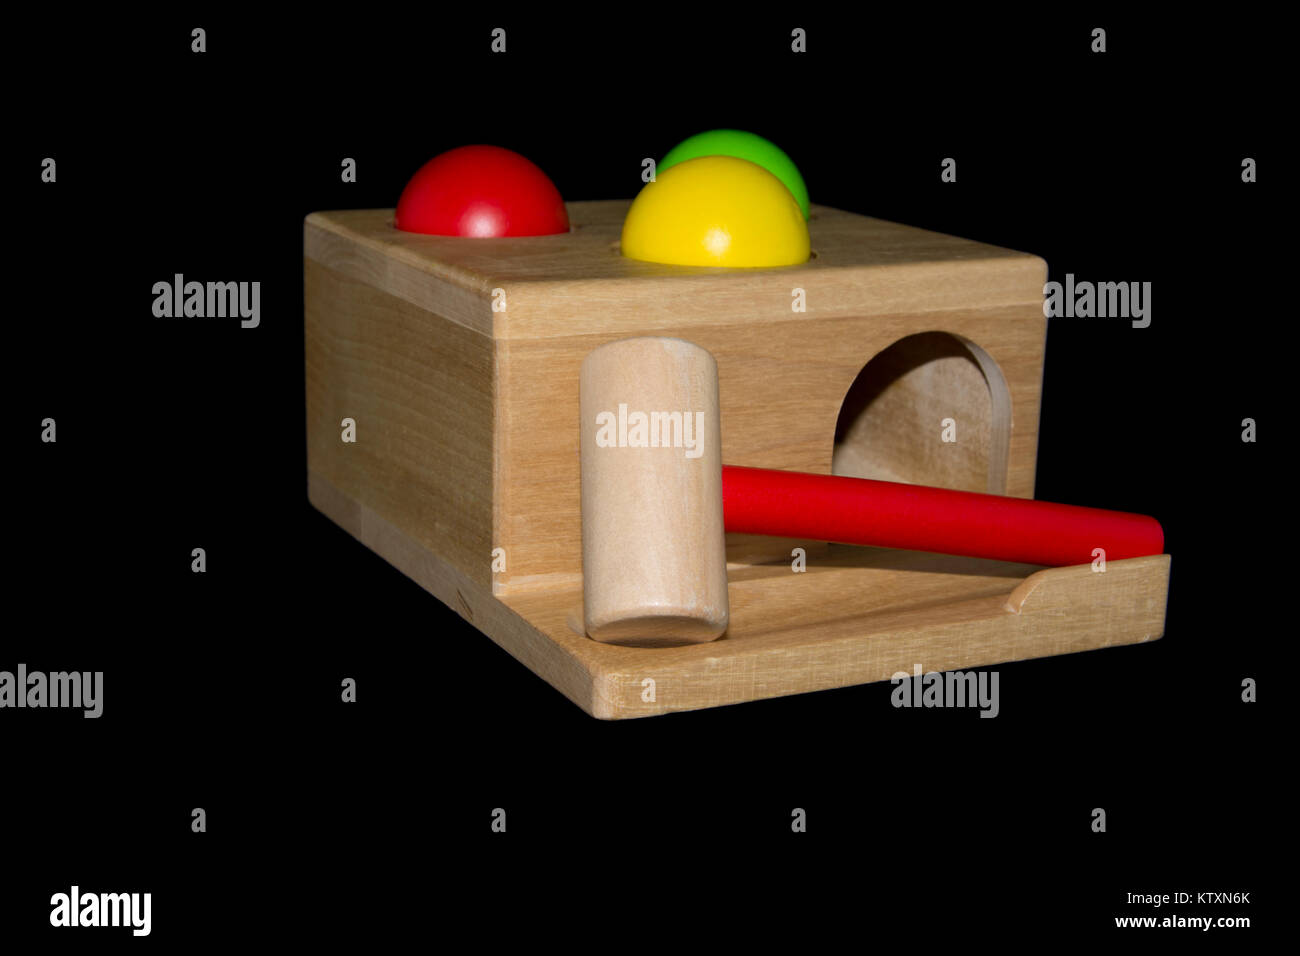 A wooden hammering toy with three coloured balls and a hammer isolated against a black background Stock Photo